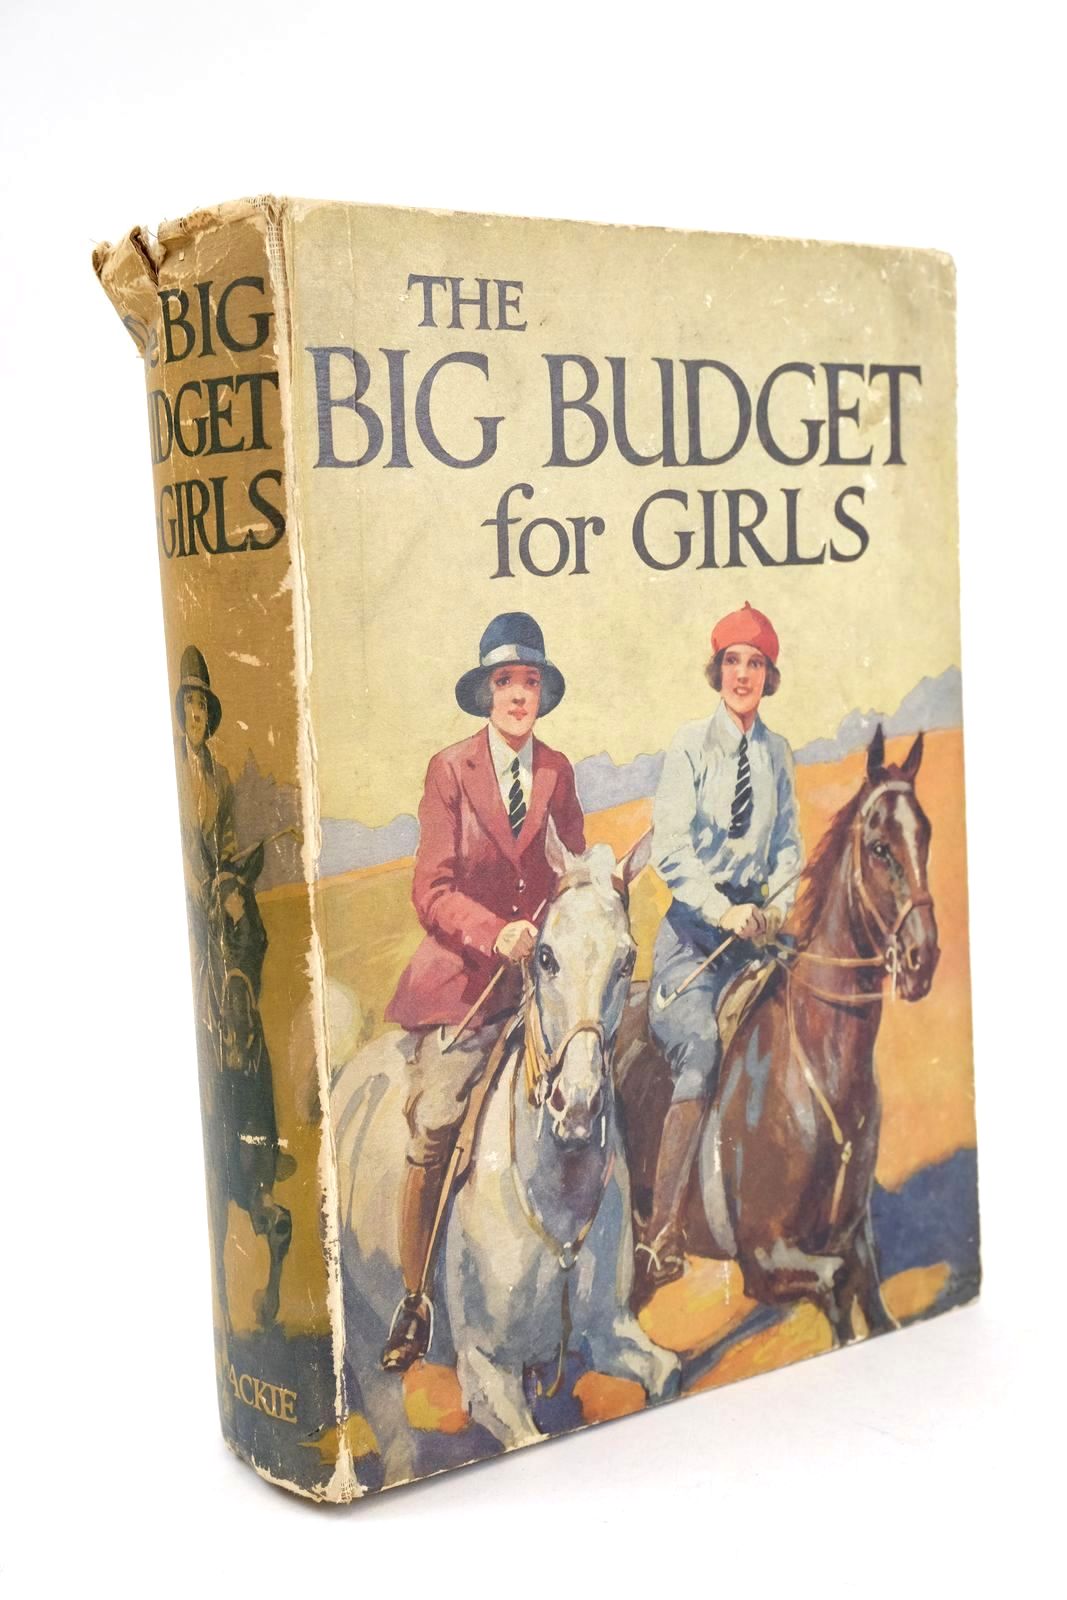 Photo of THE BIG BUDGET FOR GIRLS written by Rutley, C. Bernard Rusty, Cowper, E.E. Pocock, Doris et al, illustrated by Hiley, Francis E. Bestall, Alfred Brock, R.H. et al., published by Blackie &amp; Son Ltd. (STOCK CODE: 1325126)  for sale by Stella & Rose's Books